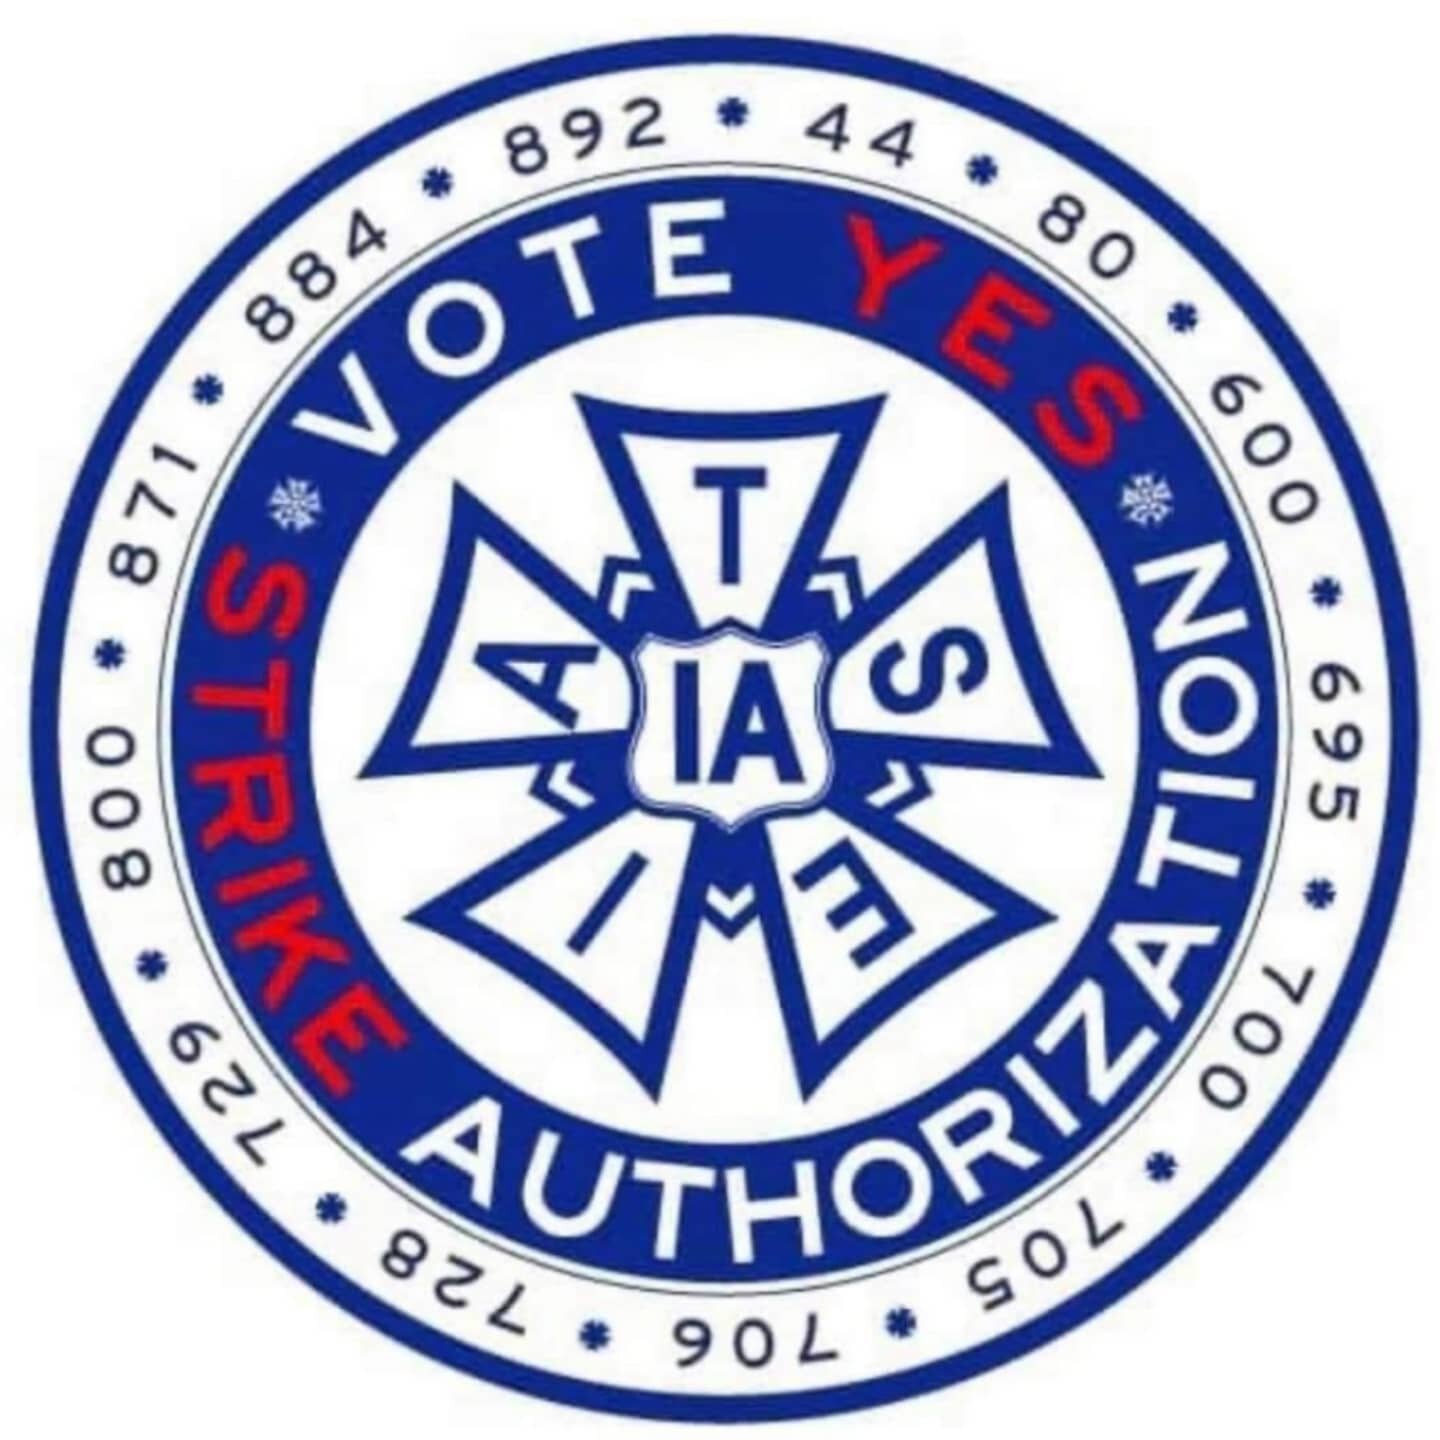 Vote YES! #IATSE
we stand in solidarity for a fair contract